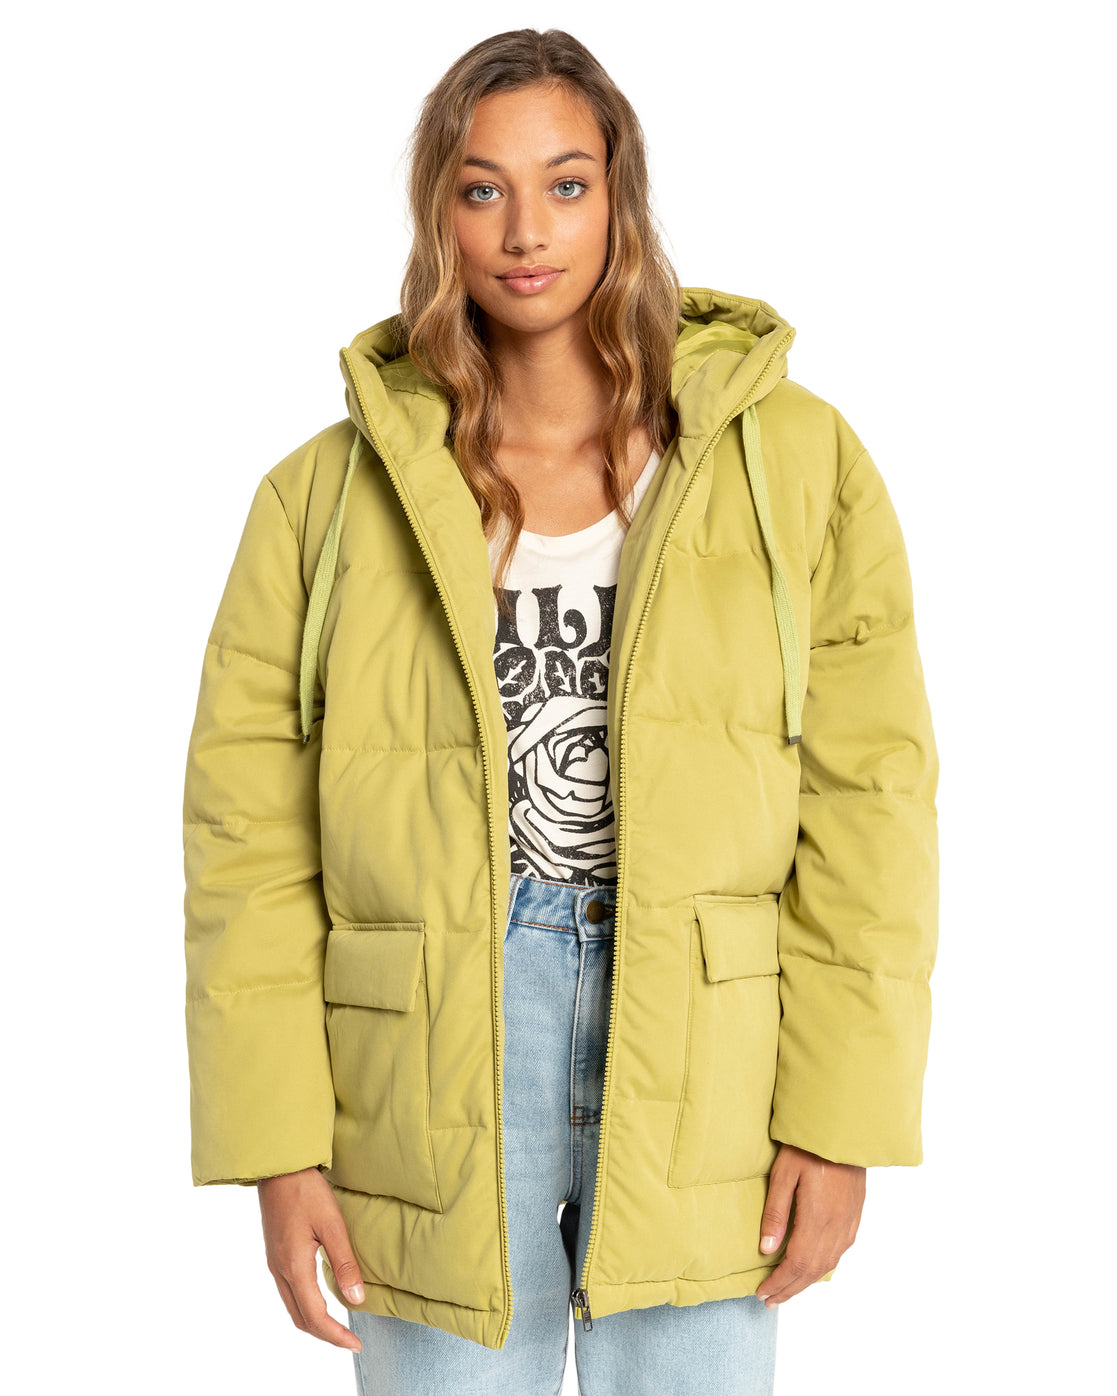 Billabong Women's Mad For You Technical Puffer Jacket Size S Lime SAMPLE 70% OFF!!!